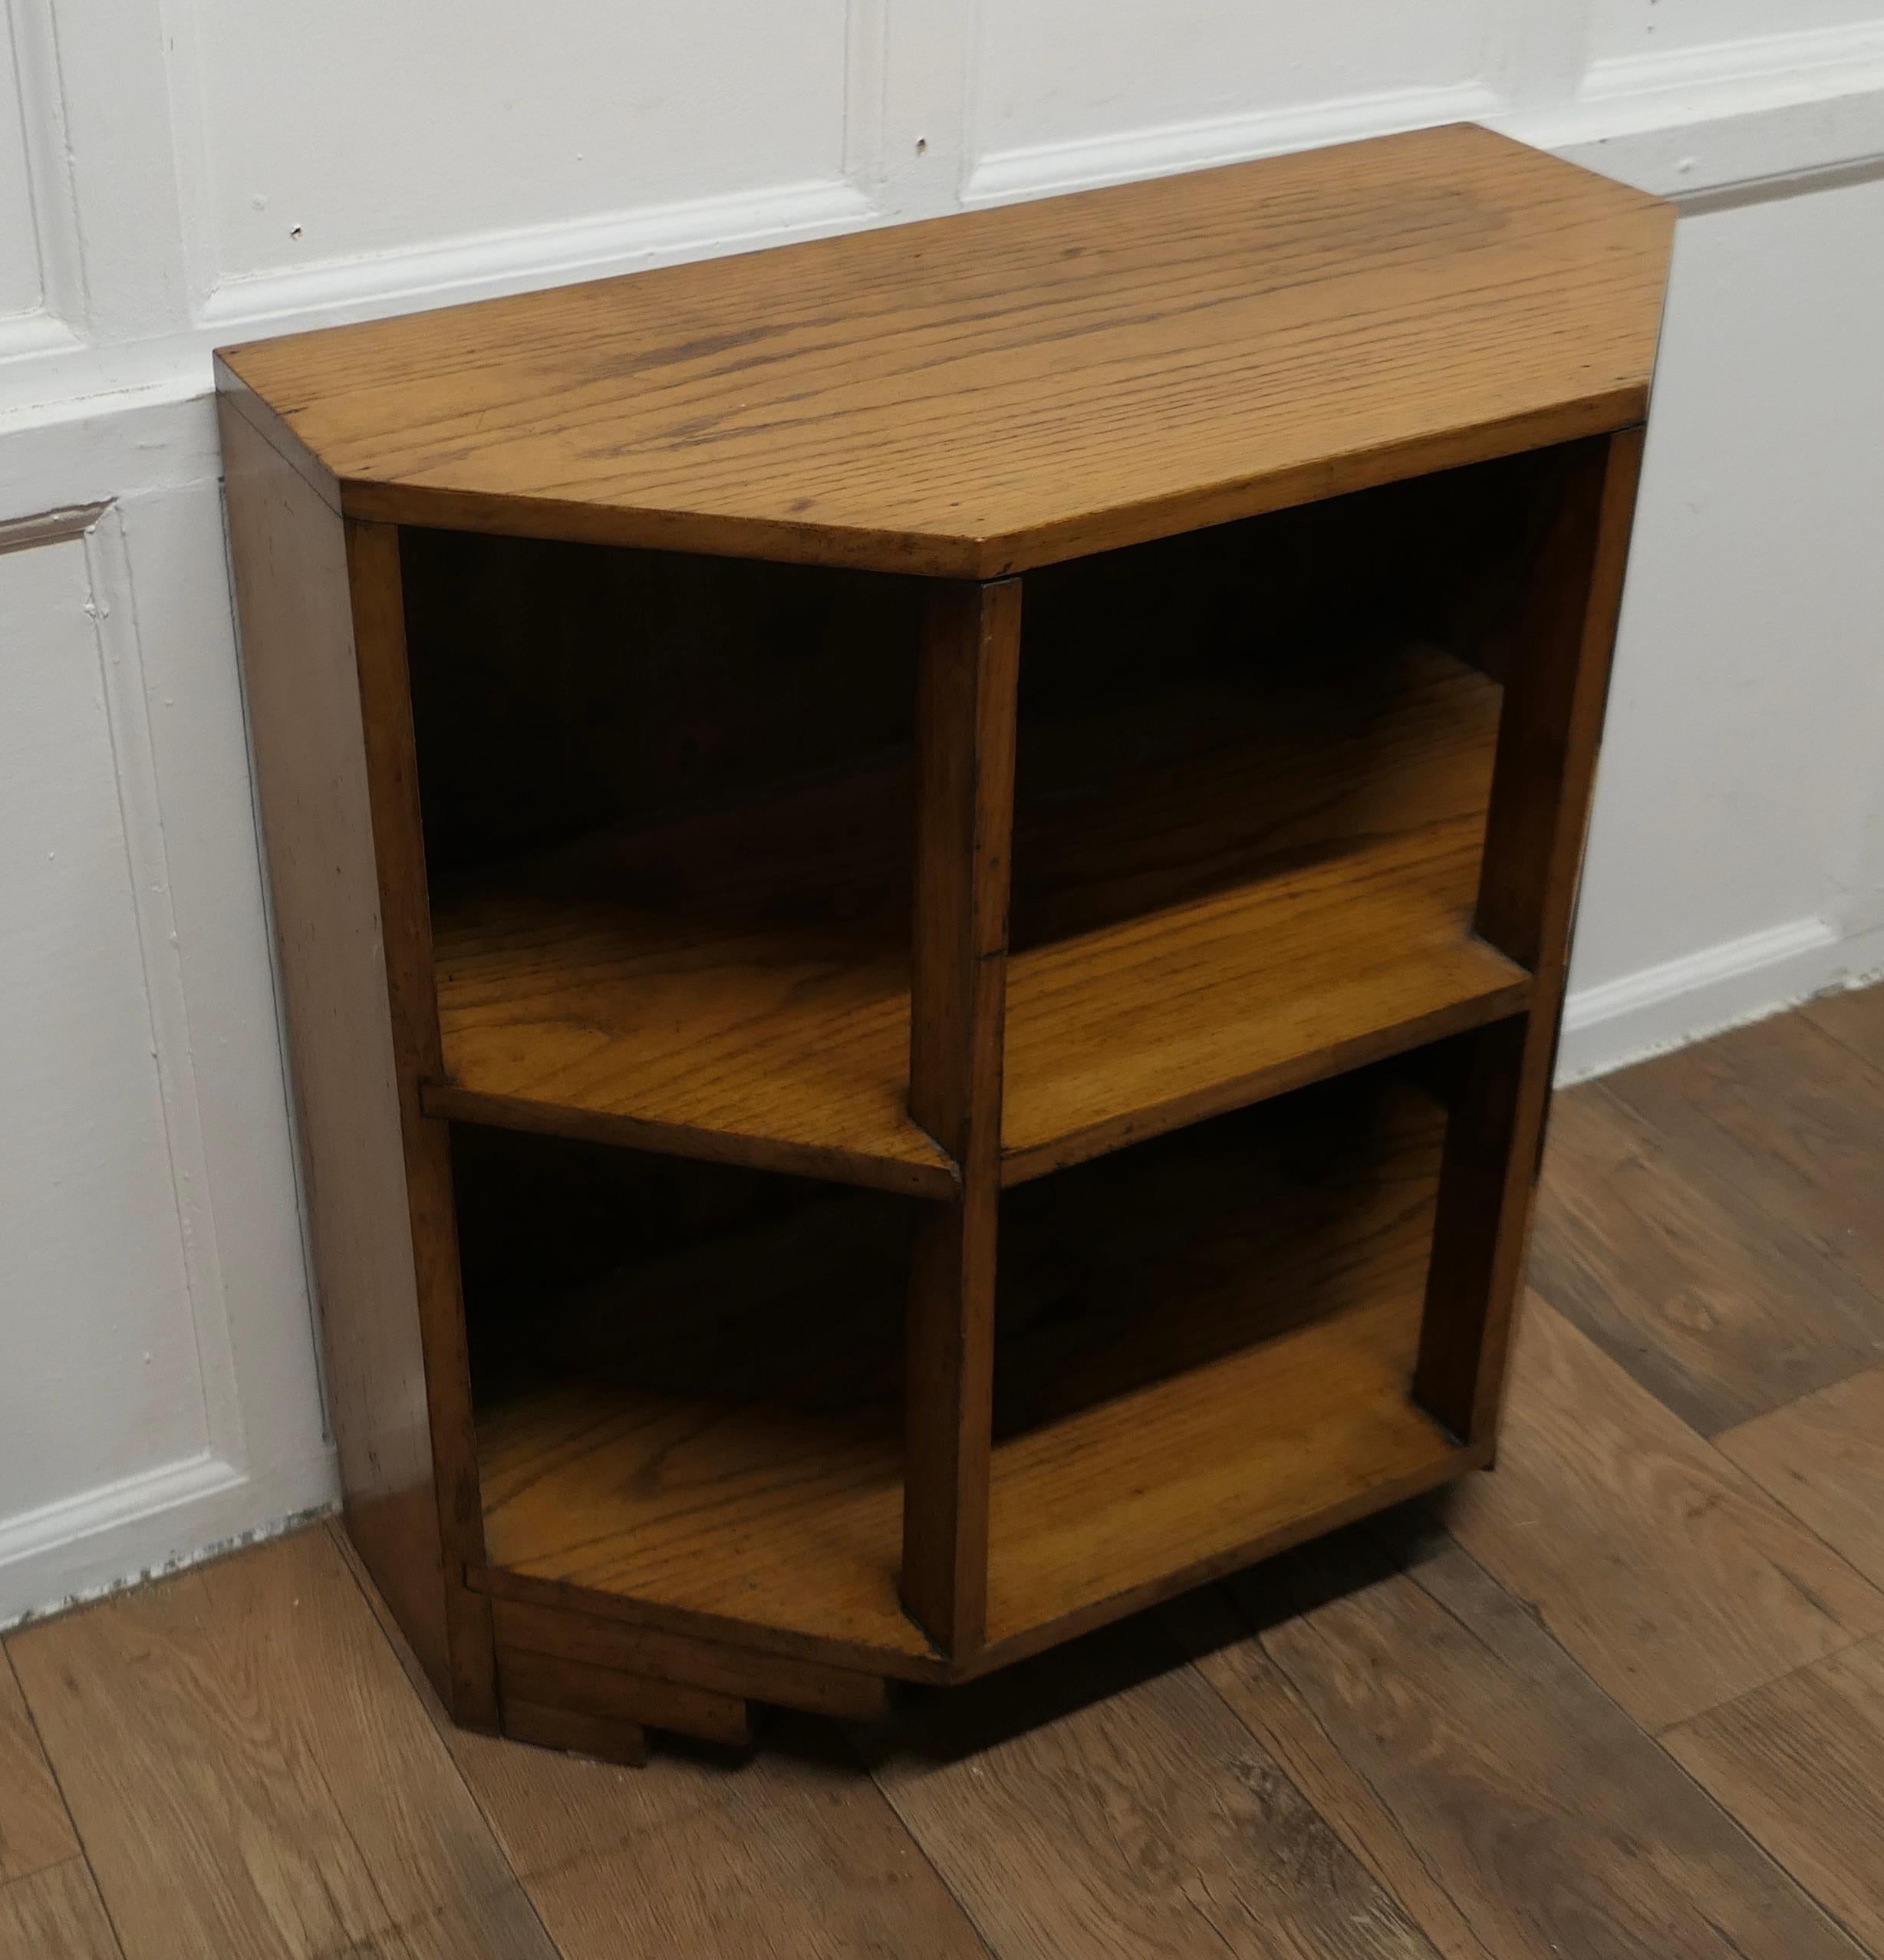 Early 20th Century Art Deco Odeon Style Golden Oak Floor Standing Shelves  This is an excellent Hea